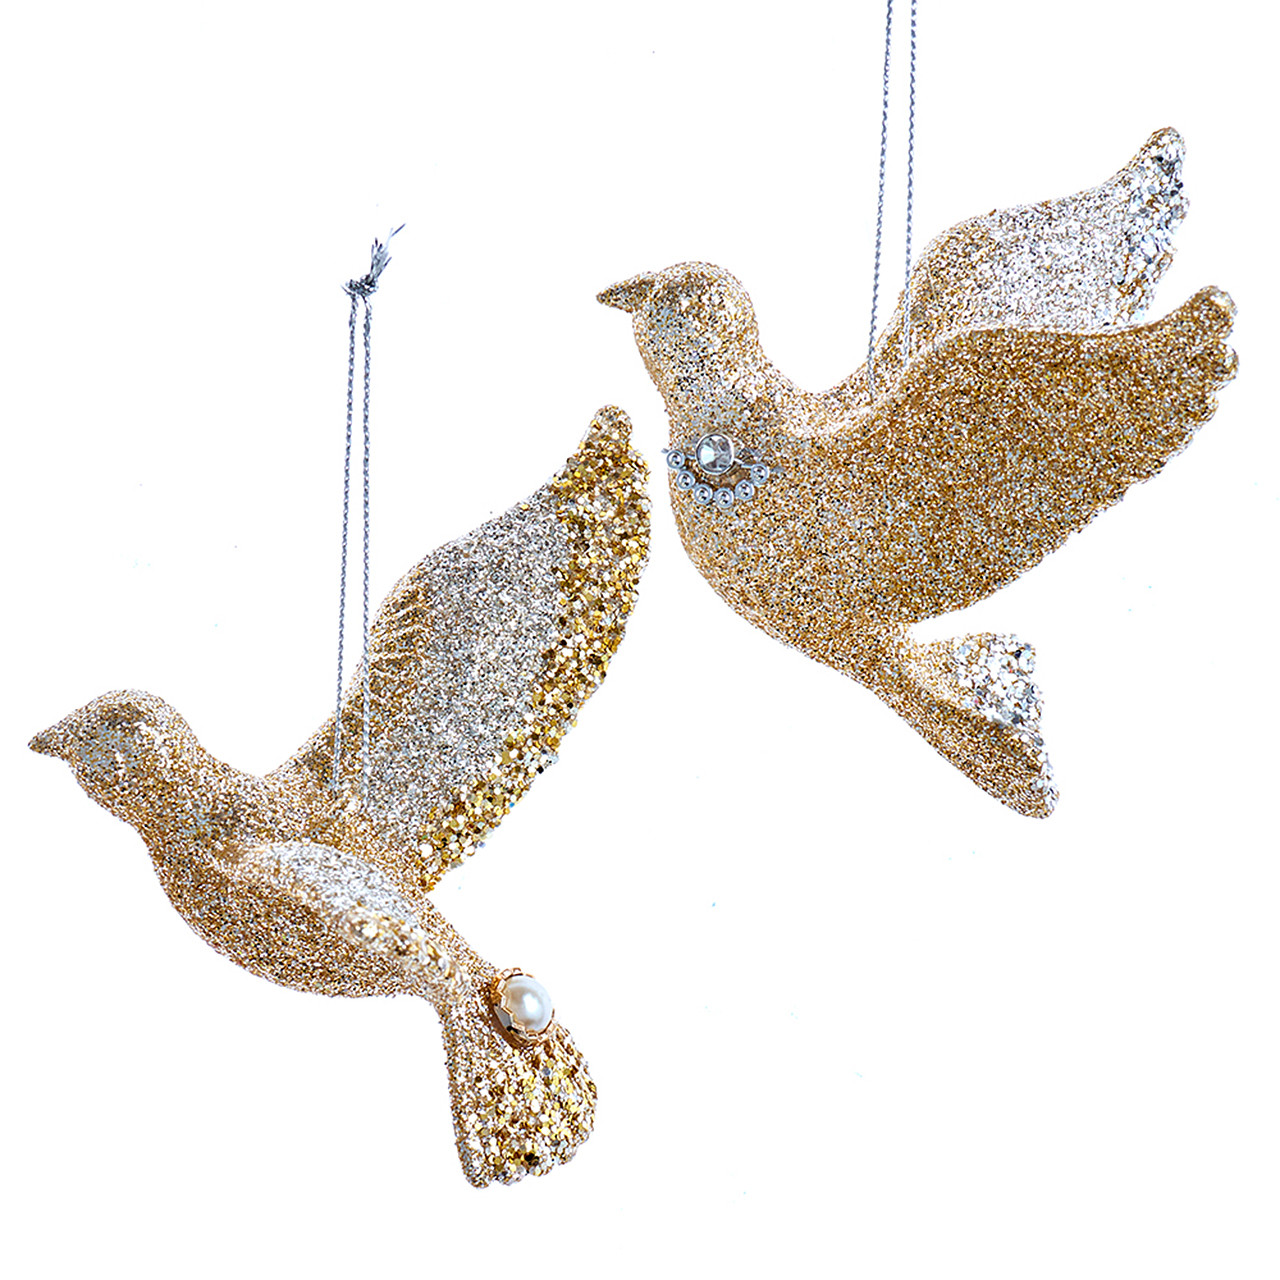 In-Store Only - 3 in. Platinum Dove Ornaments, Set of 2 